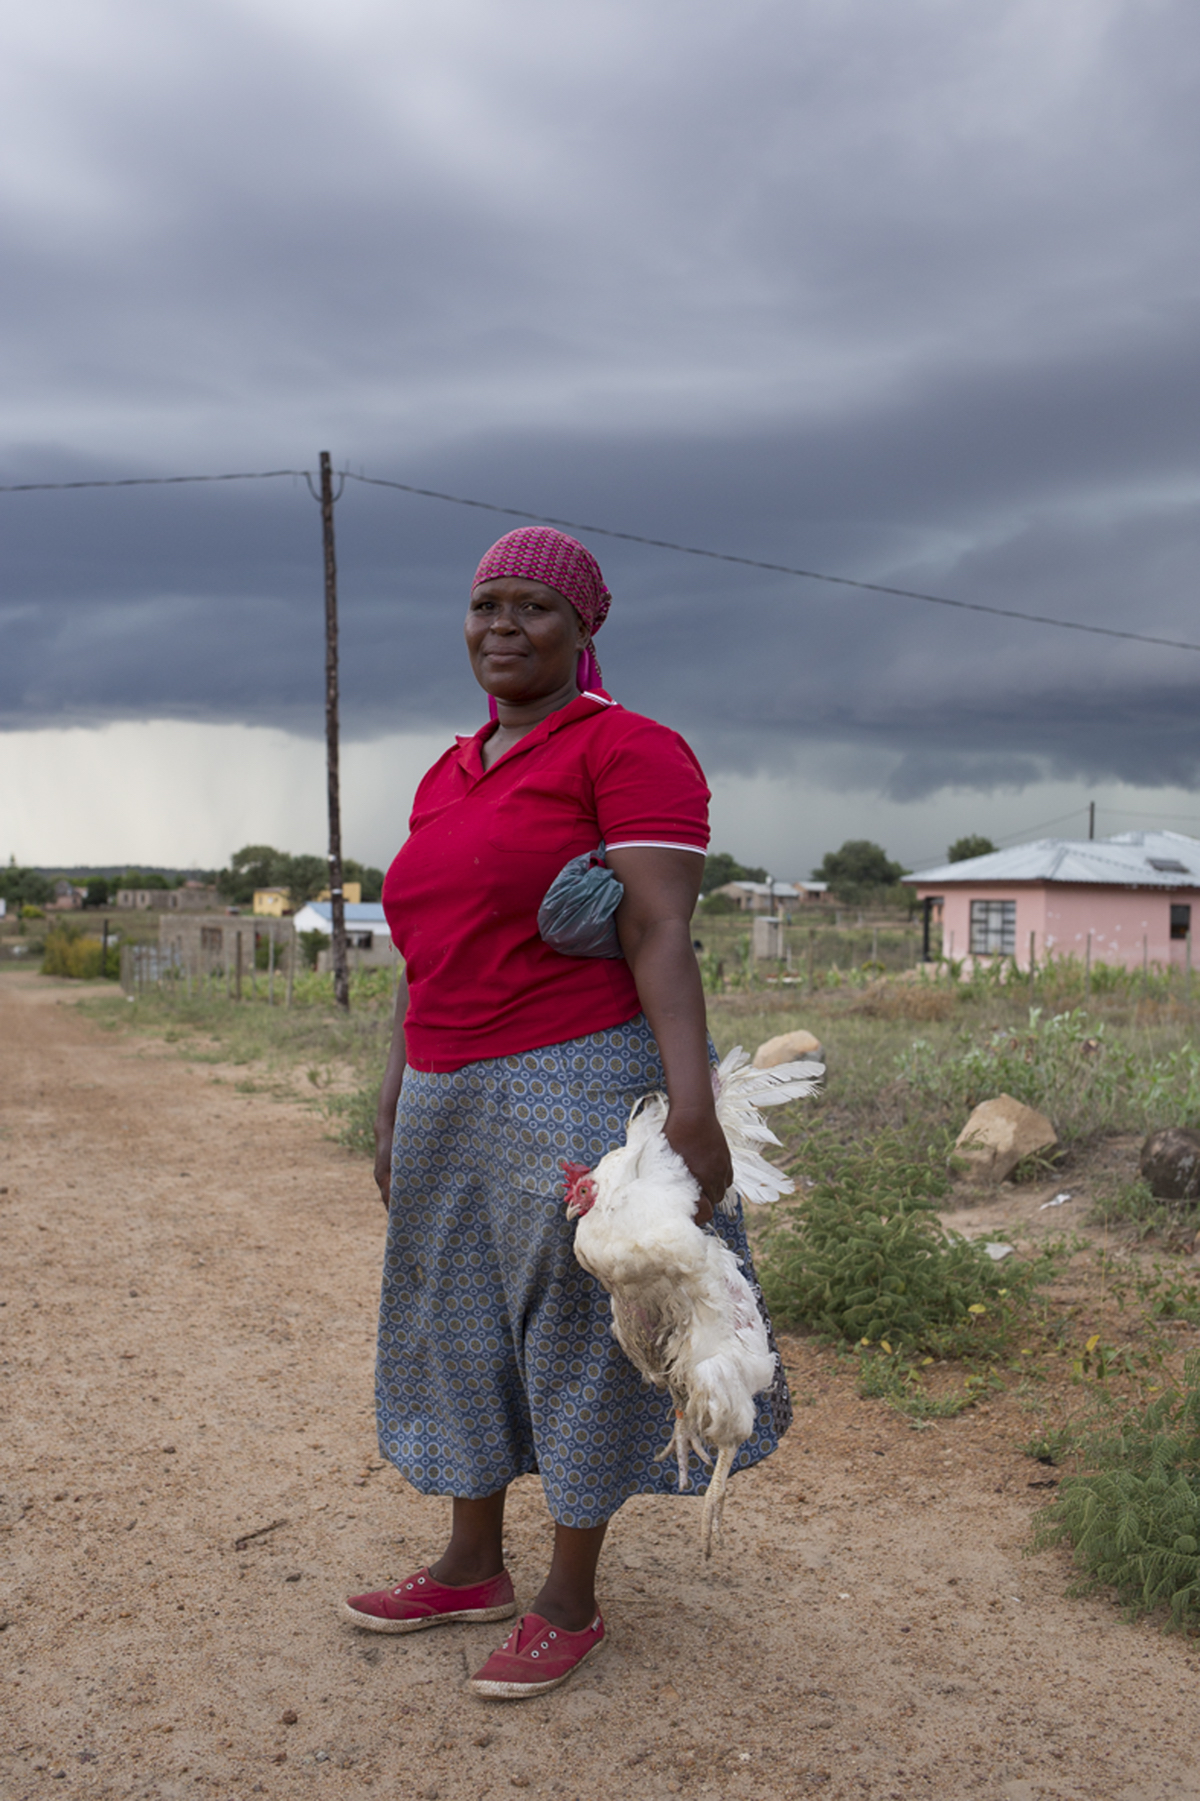 Giya Makondo-Wills, “They Came From The Water While The World Watched” – Woman with a red shirt and shoes and blue patterned skirt, holding a chicken by its wings with the left hand and walking on a dirt road in front of a row of houses and shrubs